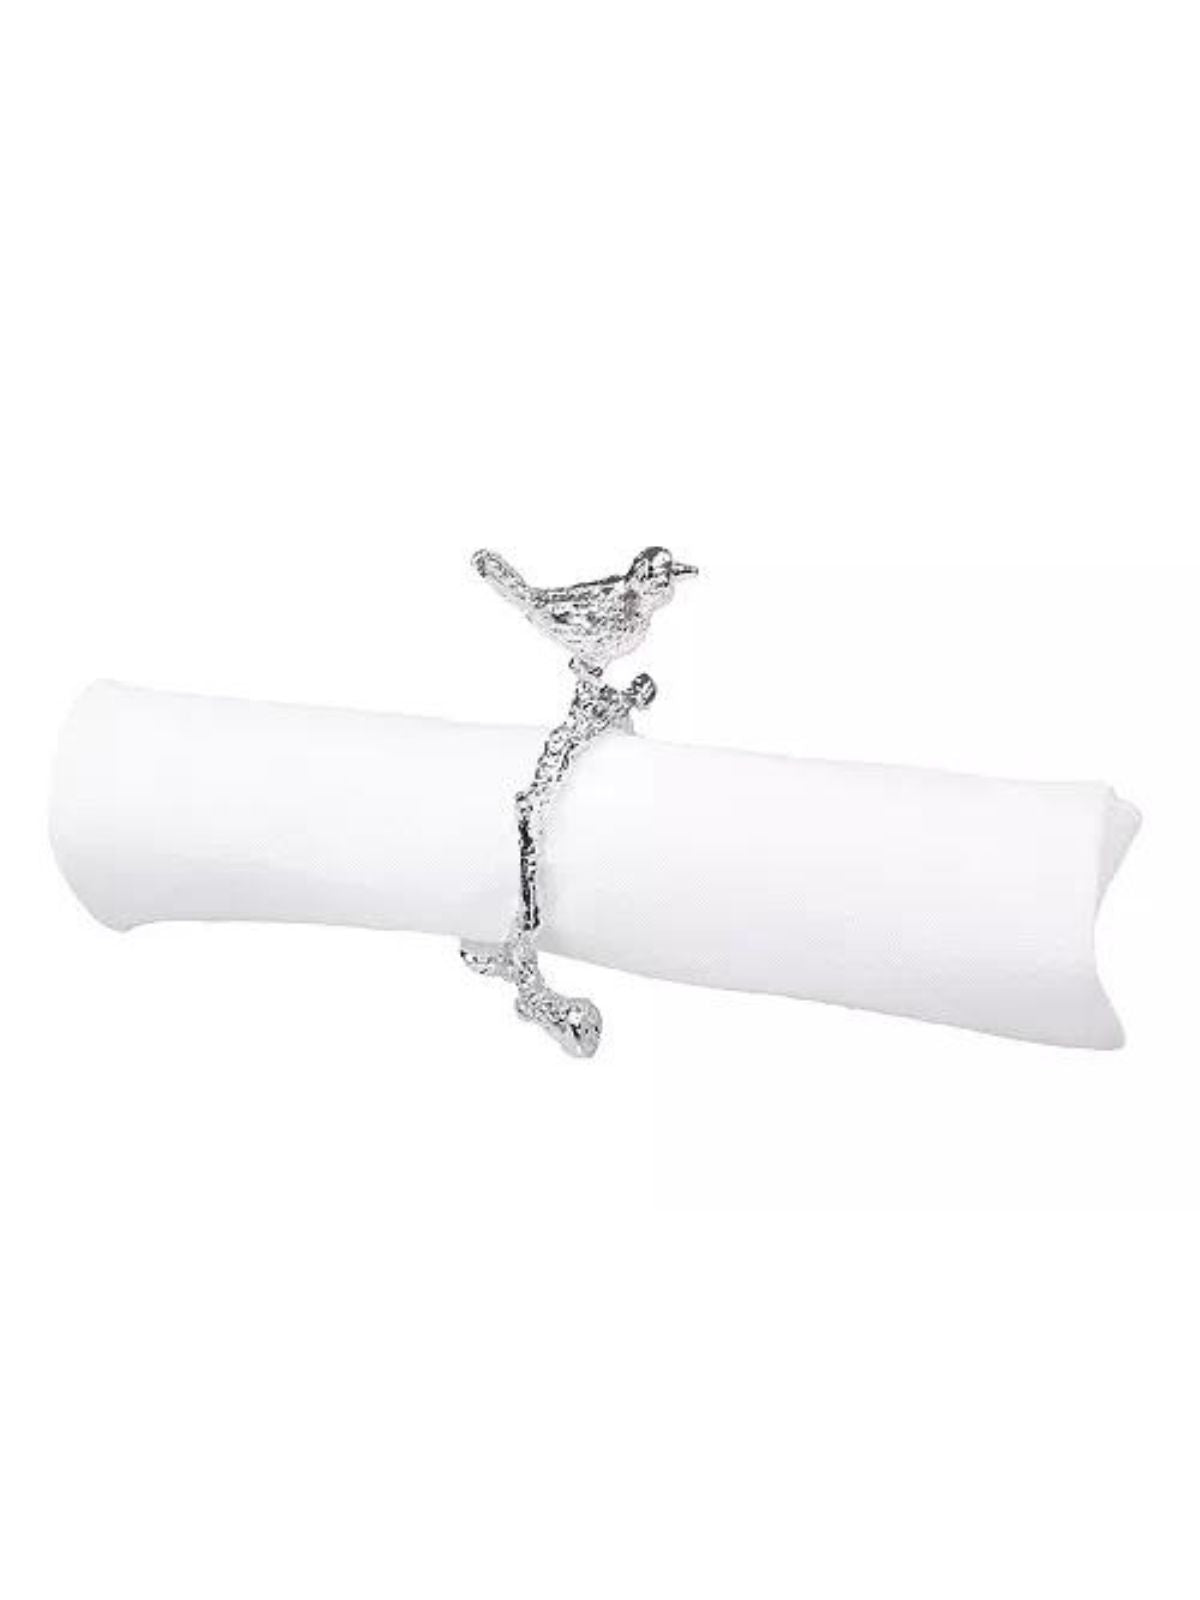 Set of 4 Silver Bird On Twig Designed Stainless Steel Napkin Rings.